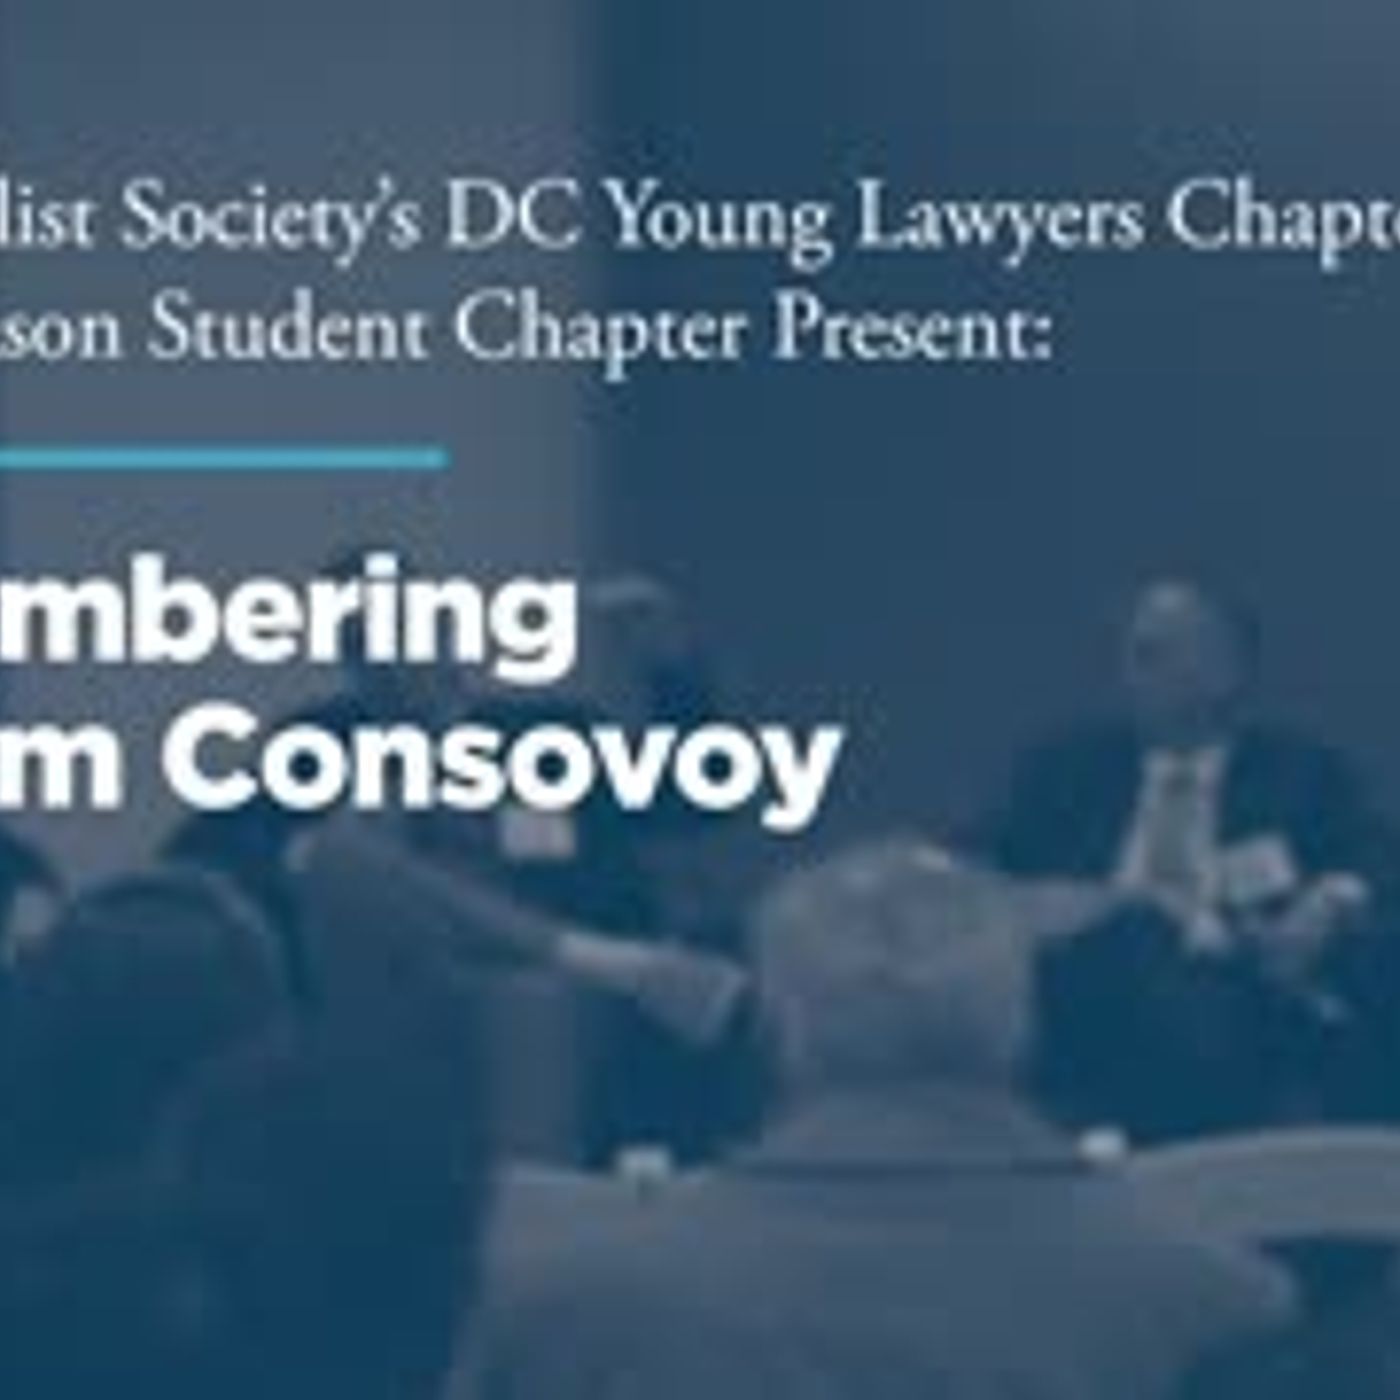 Remembering William Consovoy